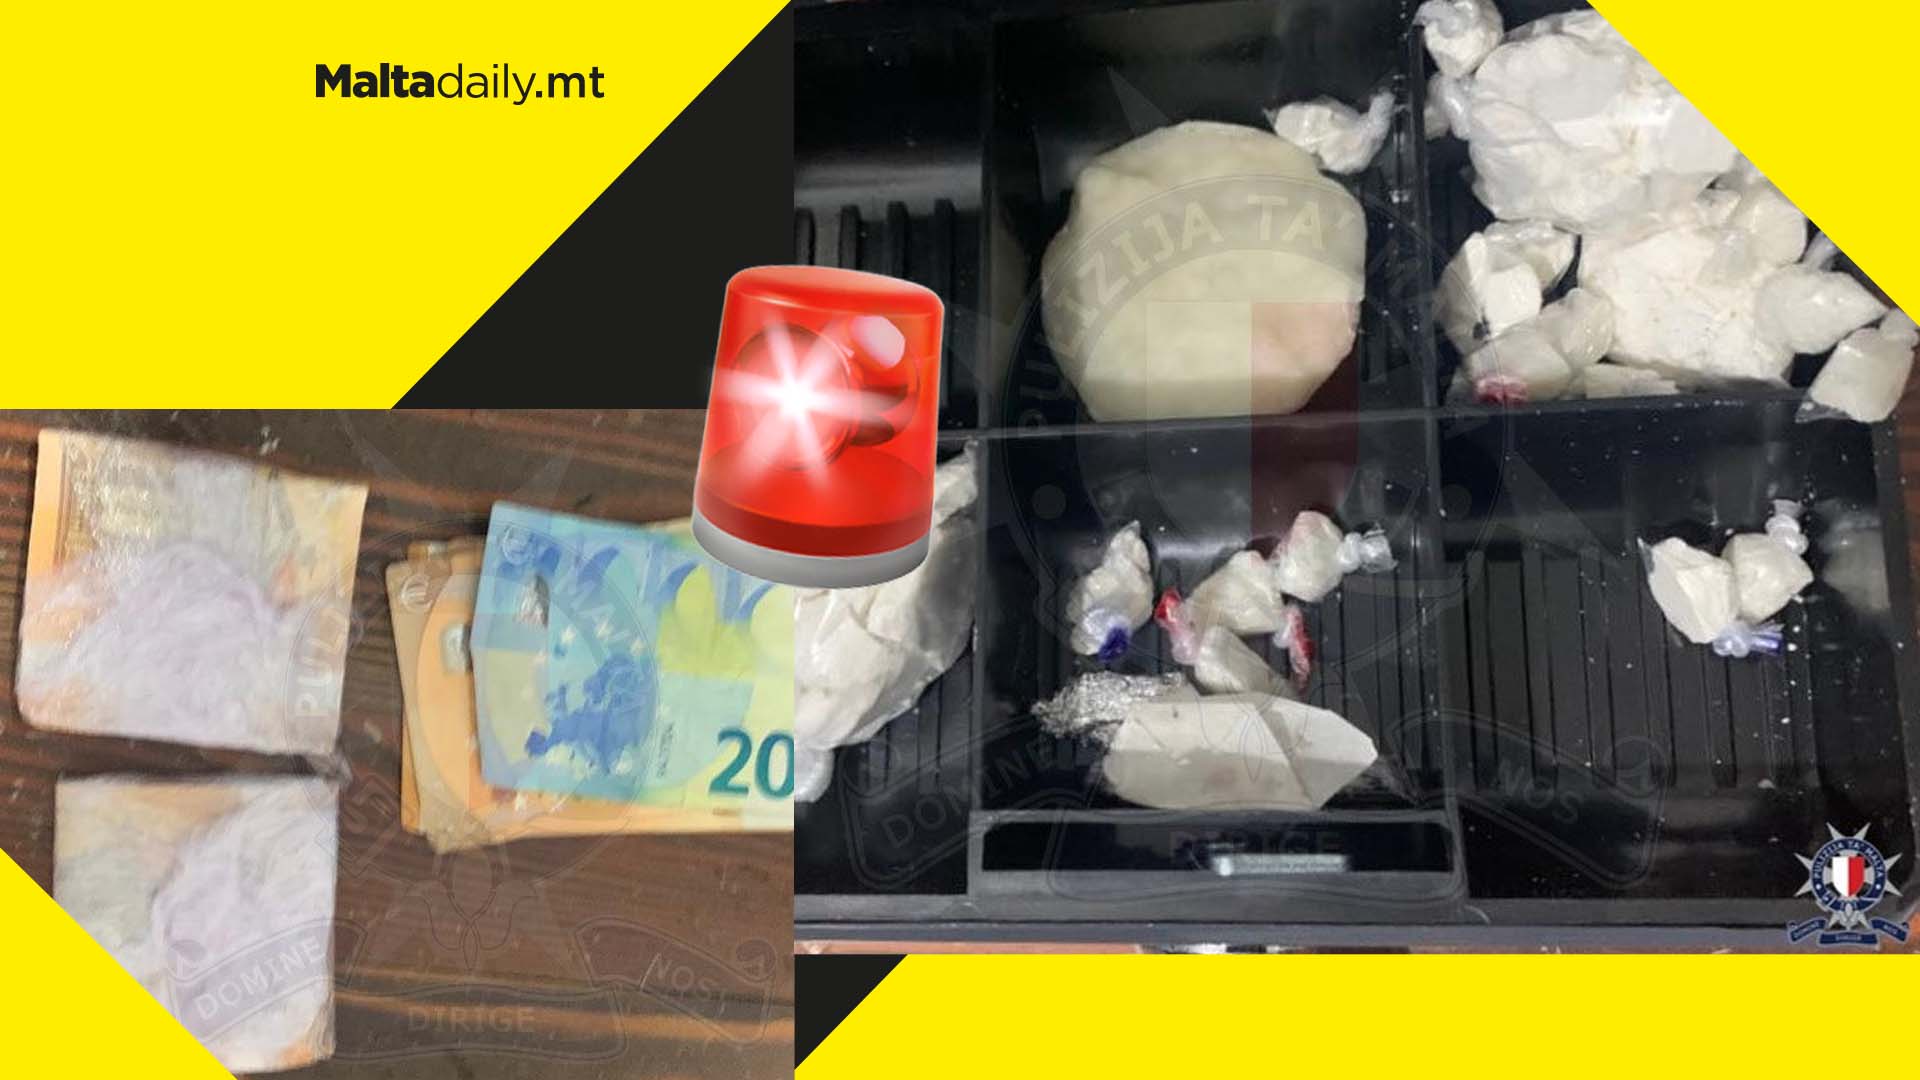 Seven people arrested for drug trafficking across two separate raids